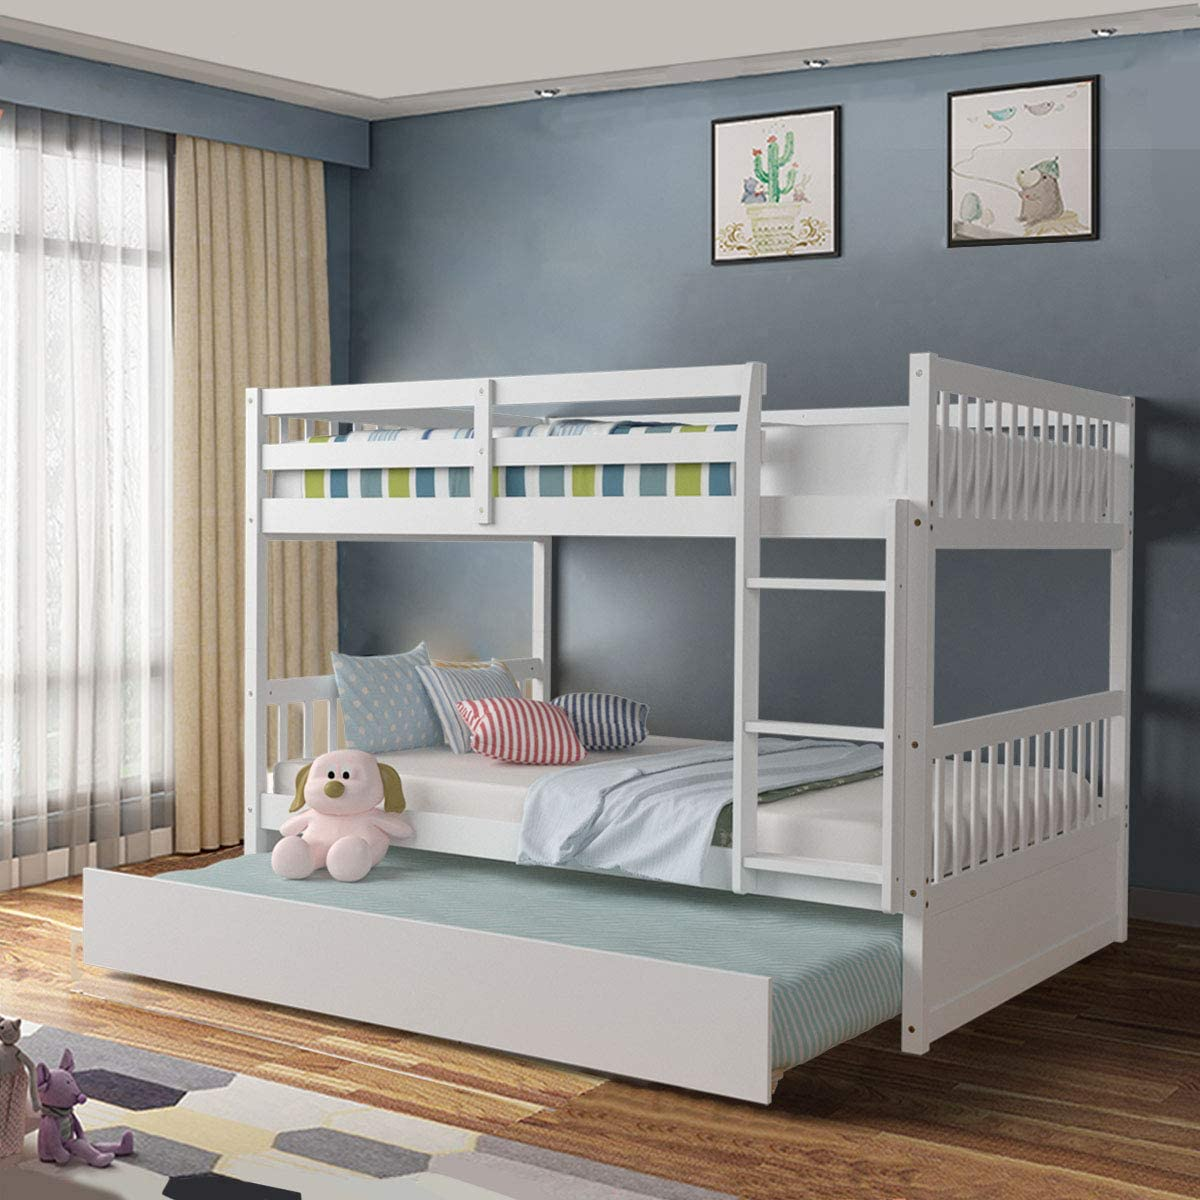 A trundle bunk bed maximizes the use of floor space.